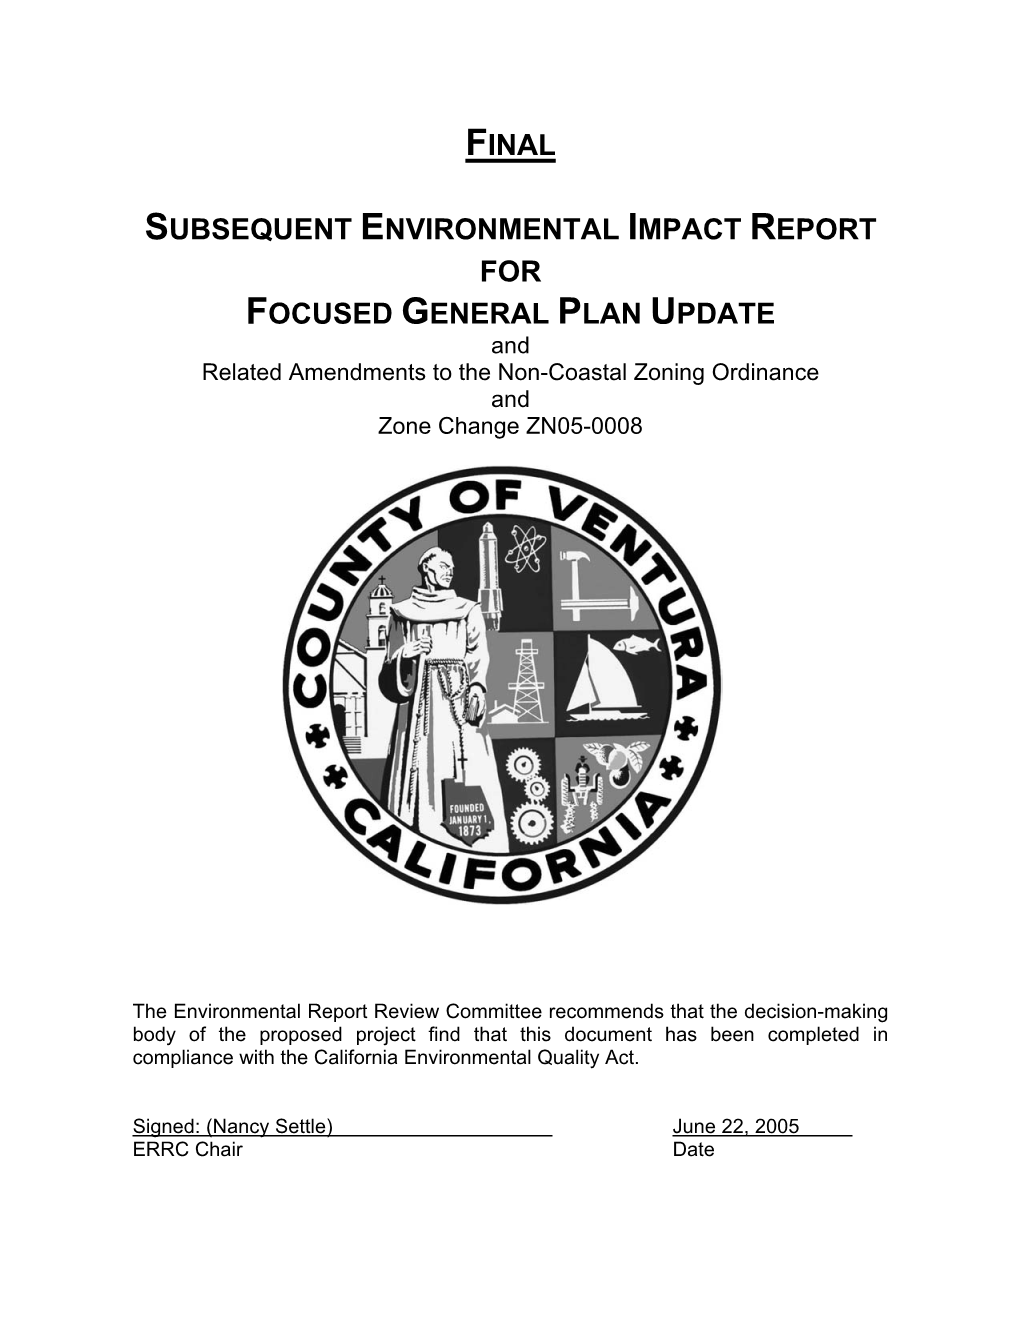 Final Subsequent Environmental Impact